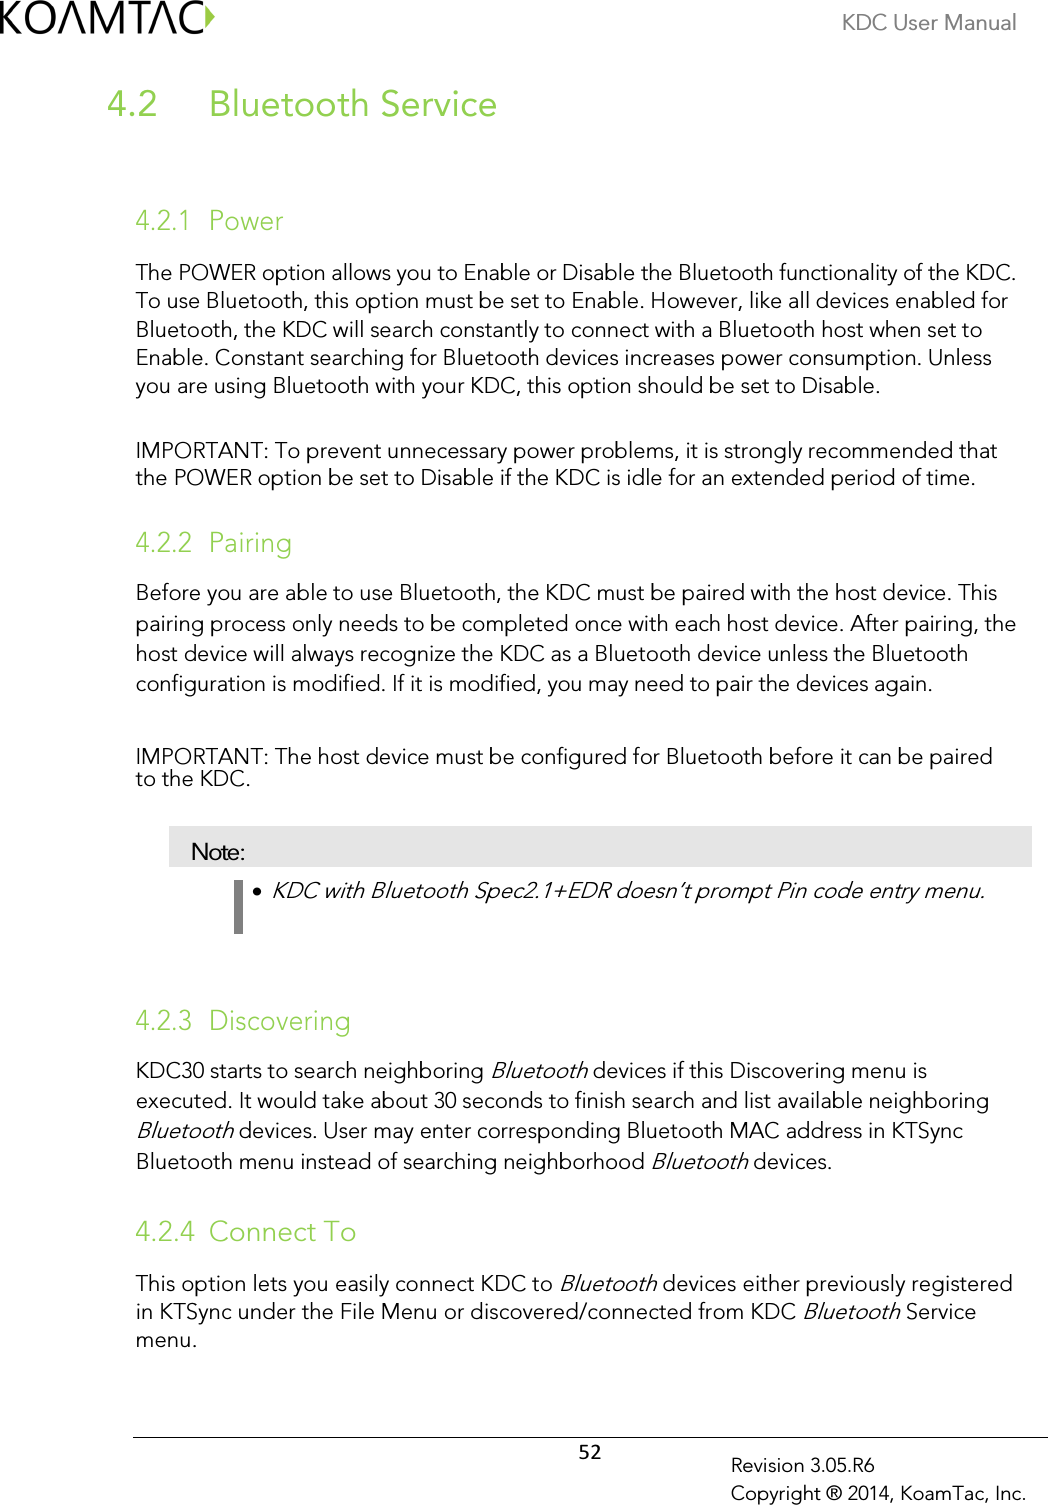 KDC User Manual  52 Revision 3.05.R6 Copyright ® 2014, KoamTac, Inc.  Bluetooth Service 4.2  4.2.1 Power  The POWER option allows you to Enable or Disable the Bluetooth functionality of the KDC.   To use Bluetooth, this option must be set to Enable. However, like all devices enabled for Bluetooth, the KDC will search constantly to connect with a Bluetooth host when set to Enable. Constant searching for Bluetooth devices increases power consumption. Unless you are using Bluetooth with your KDC, this option should be set to Disable.   IMPORTANT: To prevent unnecessary power problems, it is strongly recommended that the POWER option be set to Disable if the KDC is idle for an extended period of time.   4.2.2 Pairing  Before you are able to use Bluetooth, the KDC must be paired with the host device. This pairing process only needs to be completed once with each host device. After pairing, the host device will always recognize the KDC as a Bluetooth device unless the Bluetooth configuration is modified. If it is modified, you may need to pair the devices again.   IMPORTANT: The host device must be configured for Bluetooth before it can be paired to the KDC.   Note: •  KDC with Bluetooth Spec2.1+EDR doesn’t prompt Pin code entry menu.     4.2.3 Discovering  KDC30 starts to search neighboring Bluetooth devices if this Discovering menu is executed. It would take about 30 seconds to finish search and list available neighboring Bluetooth devices. User may enter corresponding Bluetooth MAC address in KTSync Bluetooth menu instead of searching neighborhood Bluetooth devices.  4.2.4 Connect To This option lets you easily connect KDC to Bluetooth devices either previously registered in KTSync under the File Menu or discovered/connected from KDC Bluetooth Service menu.  